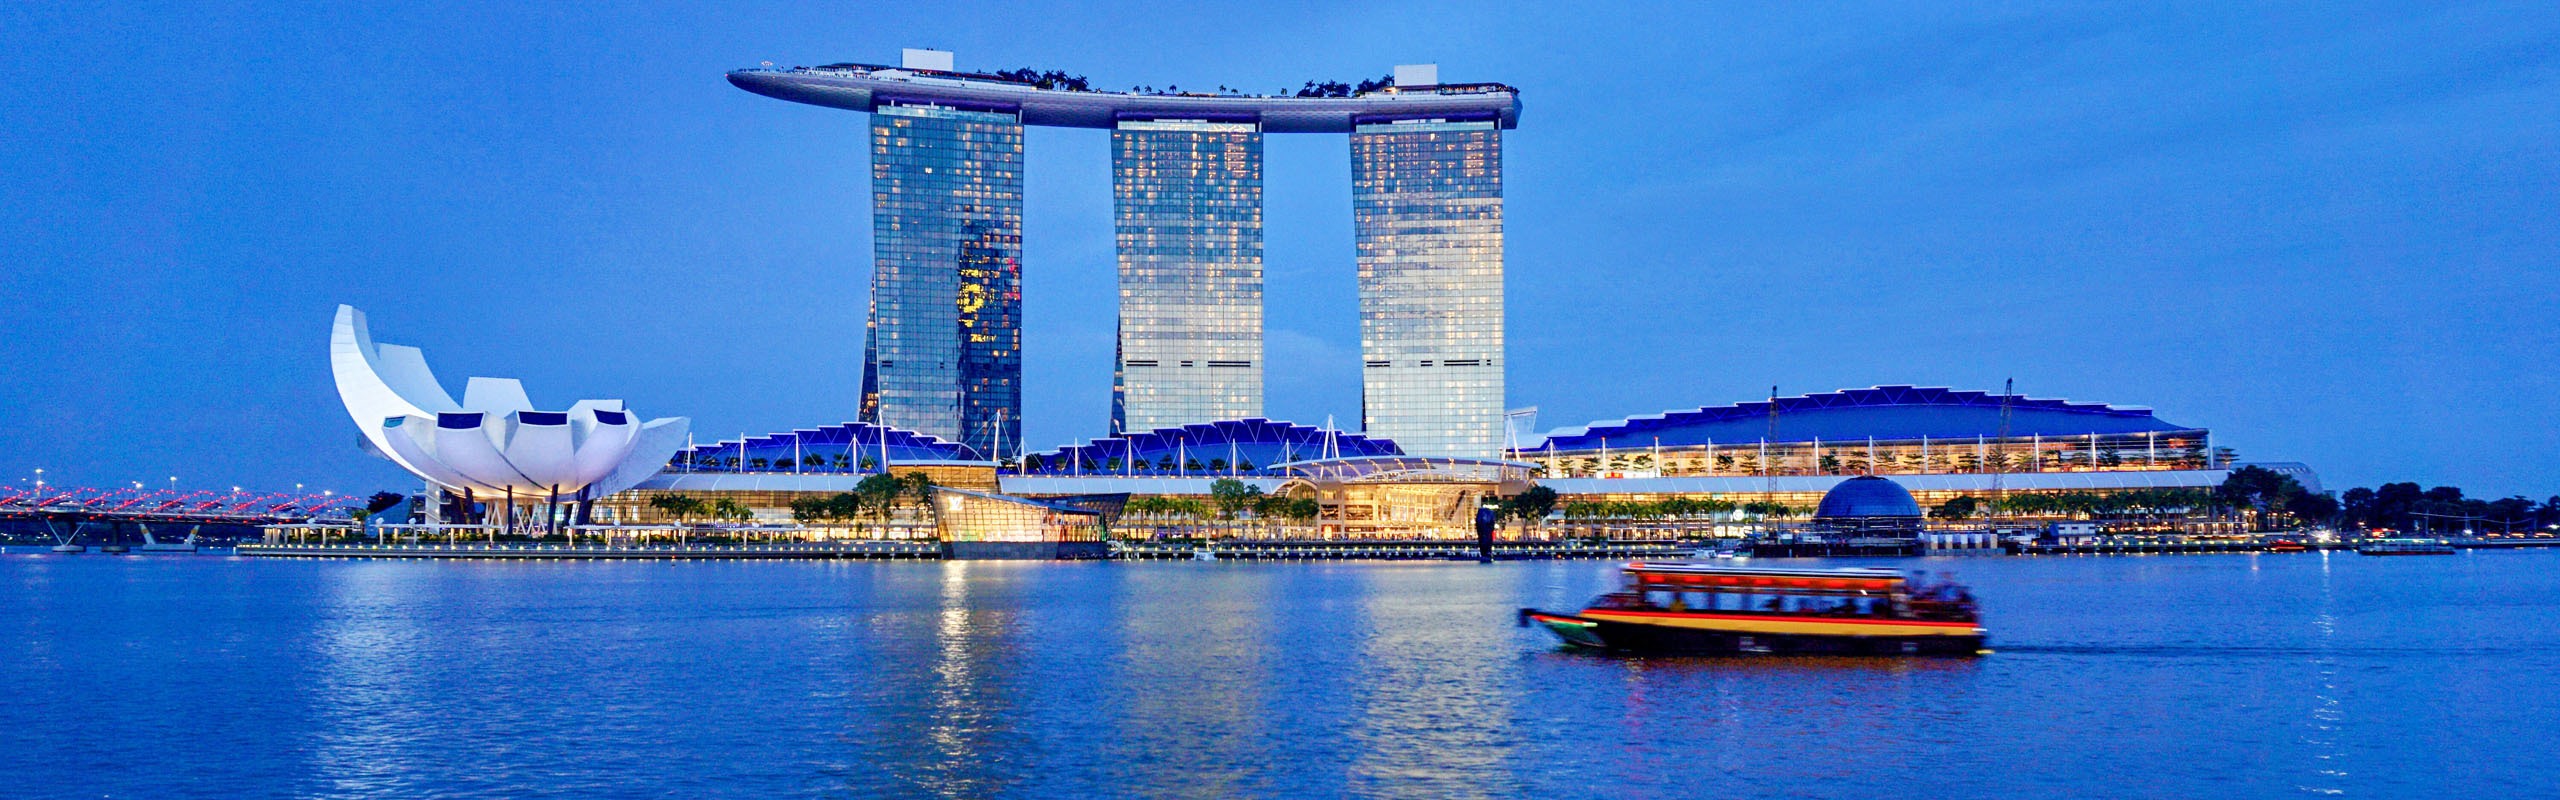 Where to Stay in Singapore